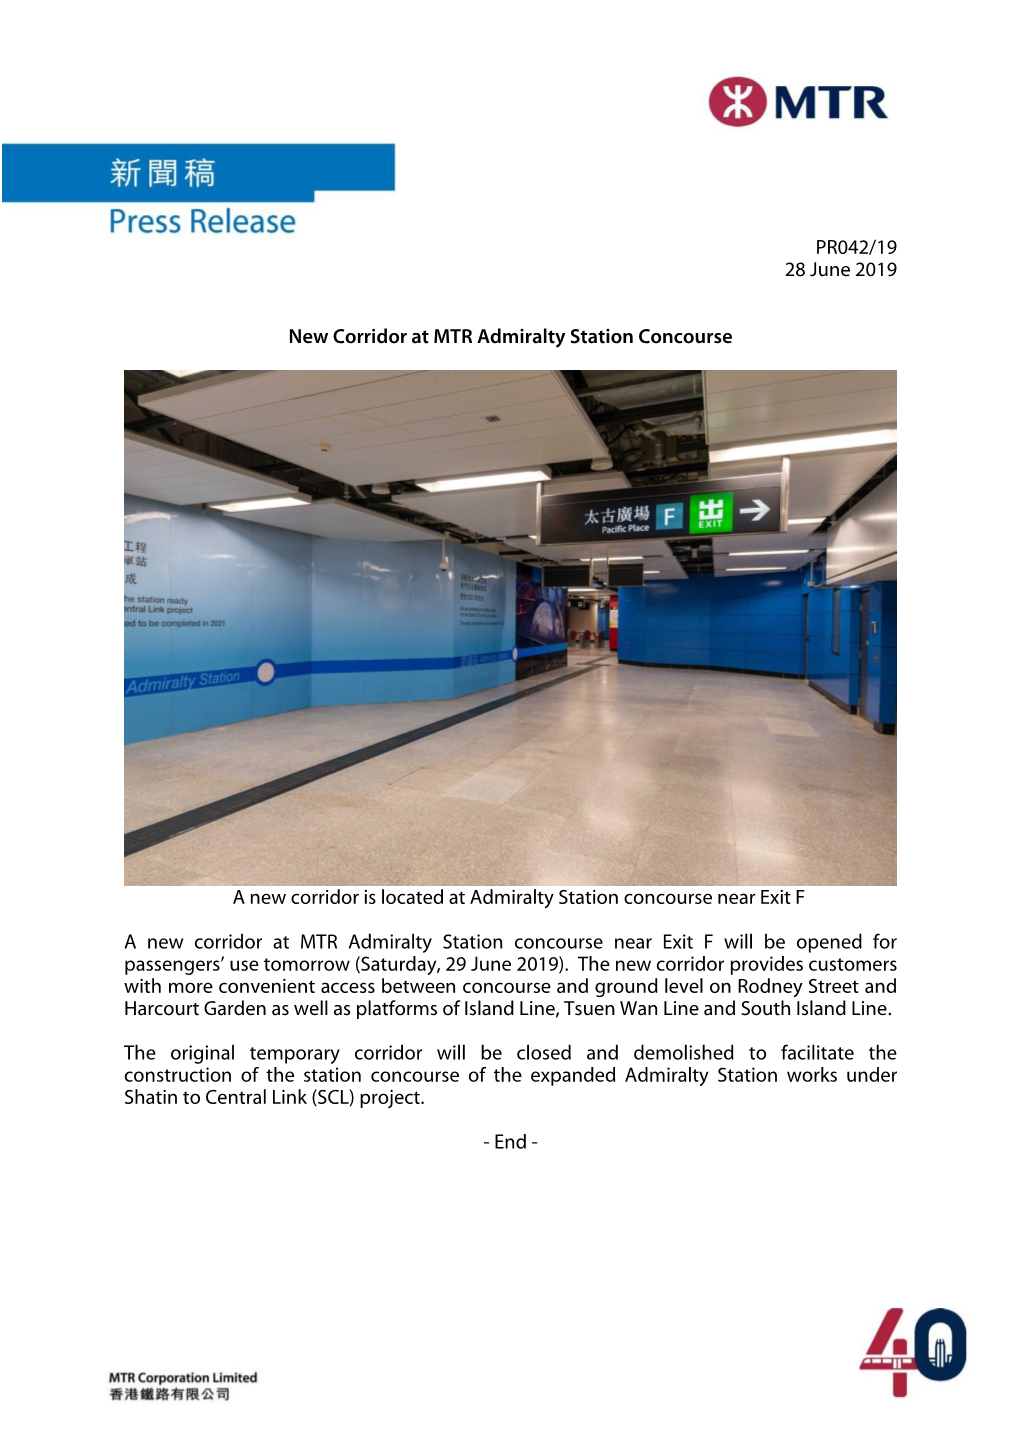 28 June 2019 New Corridor at MTR Admiralty Station Concourse